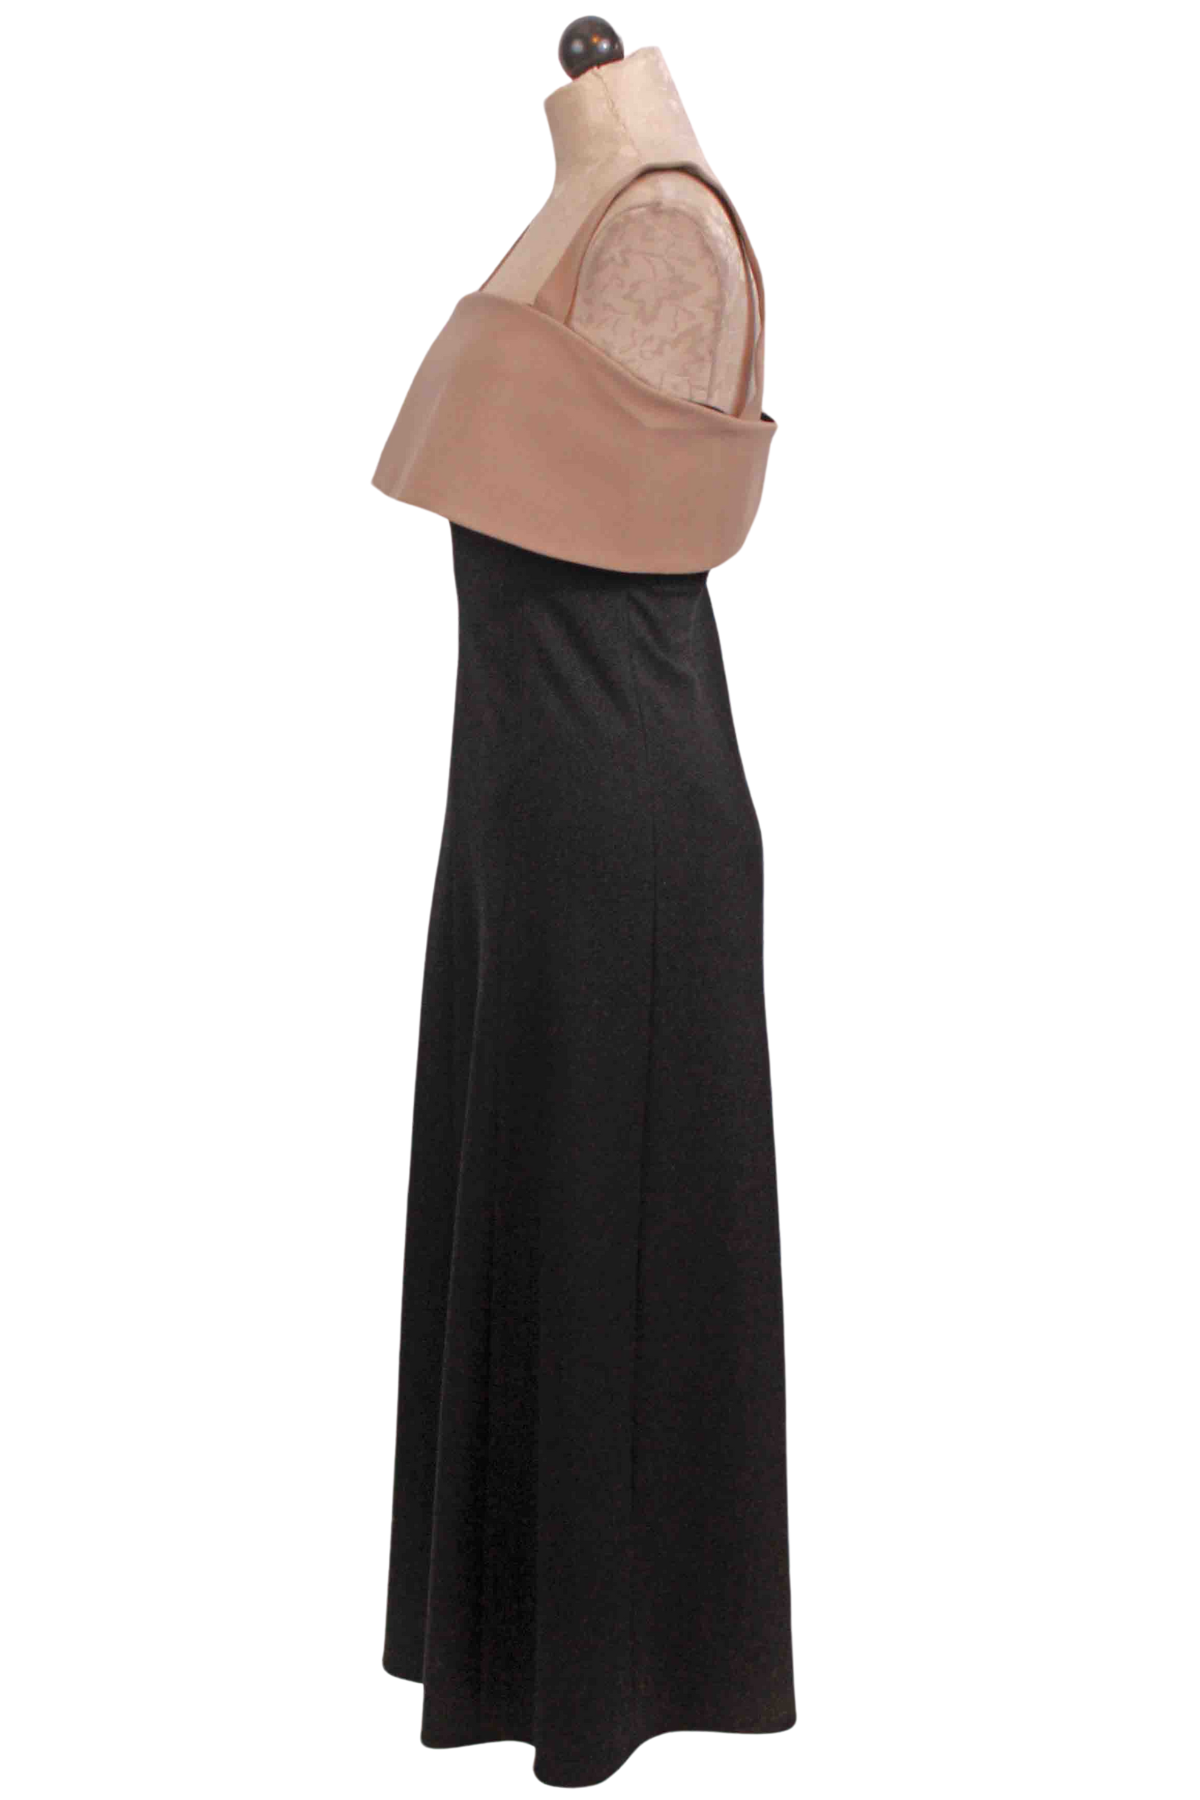 side view of Black with contrasting taupe colored panel Centre Tank Dress by Rue Sophie